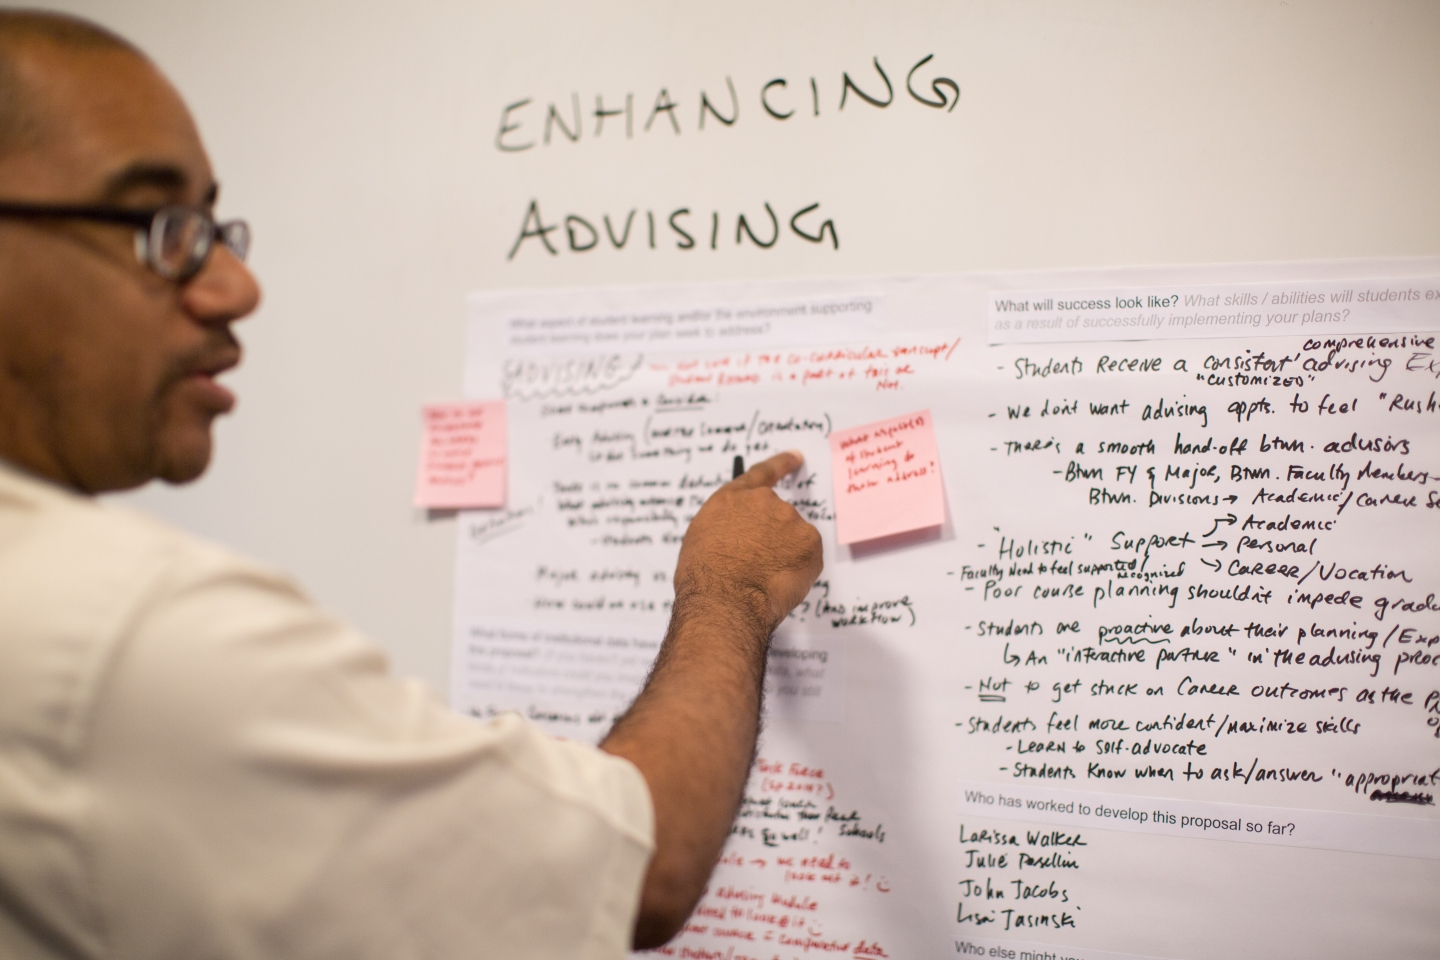 wilson terrell places a post-it note on a whiteboard about advising